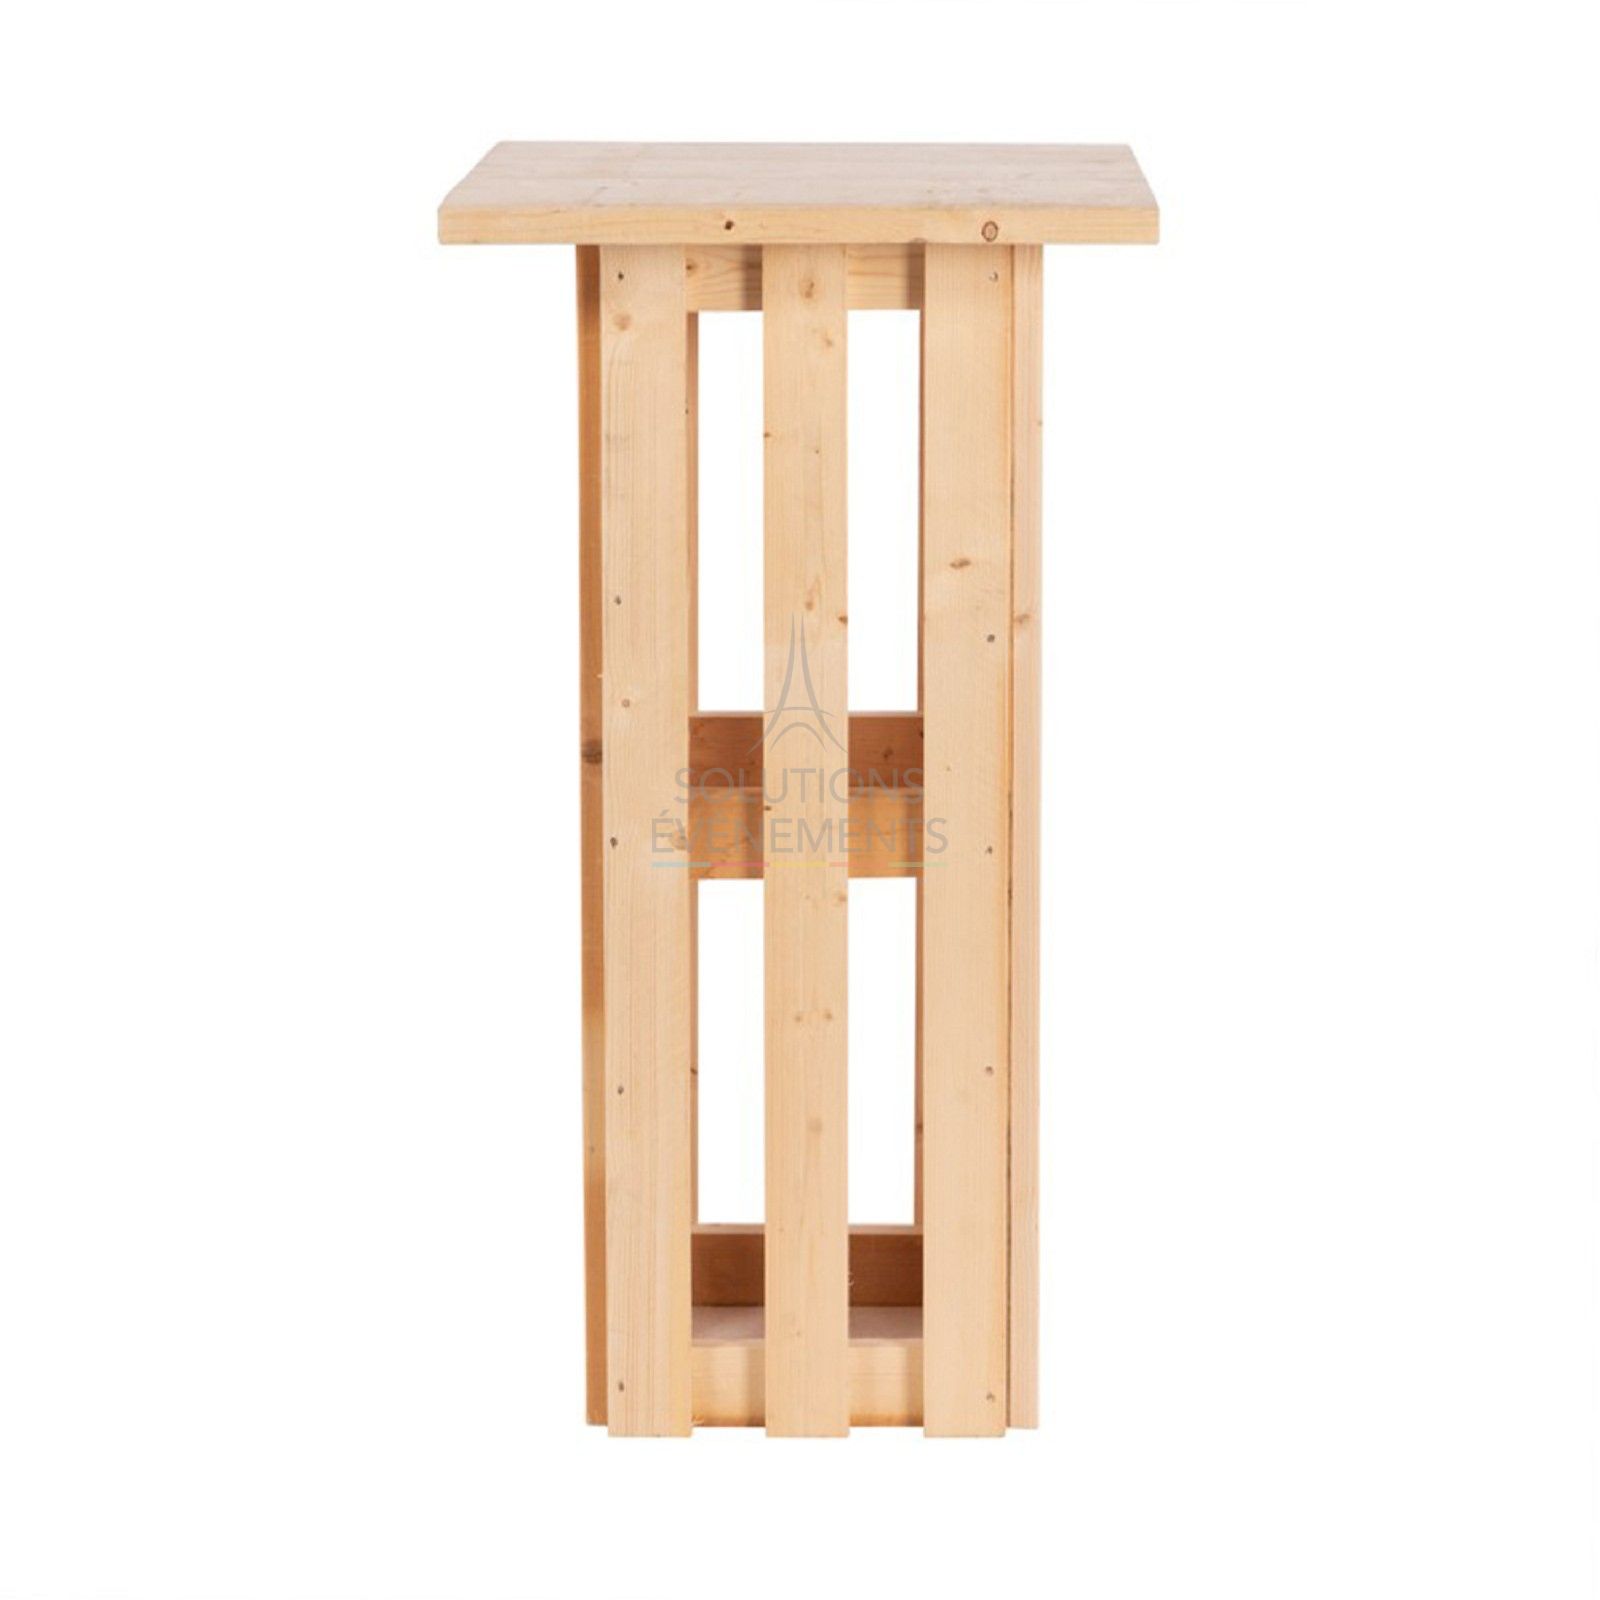 Recycled pallet wood standing table rental